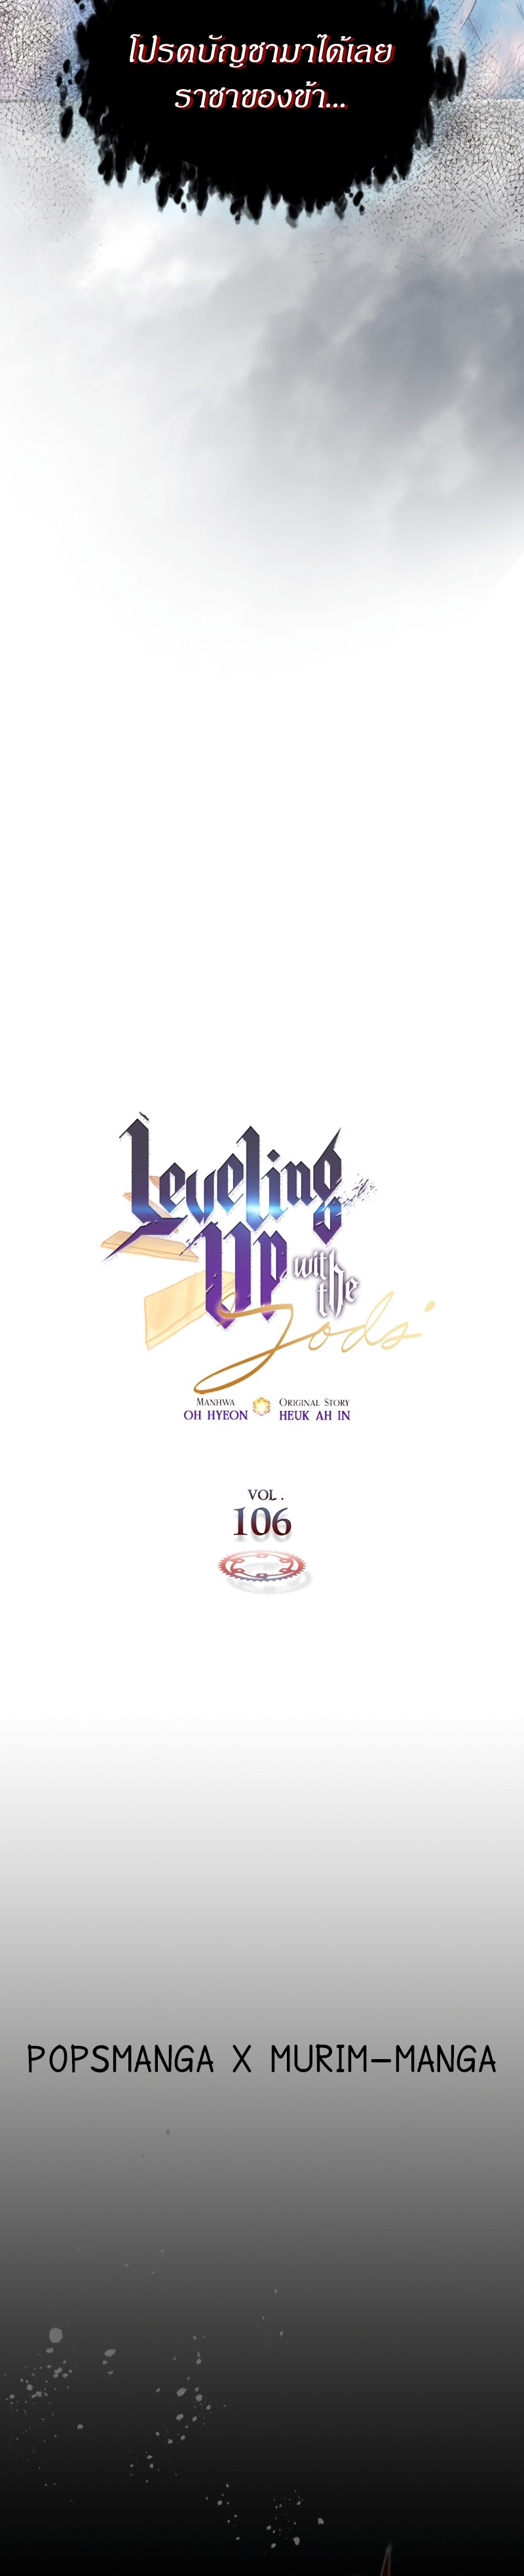 leveling with the gods 106.02